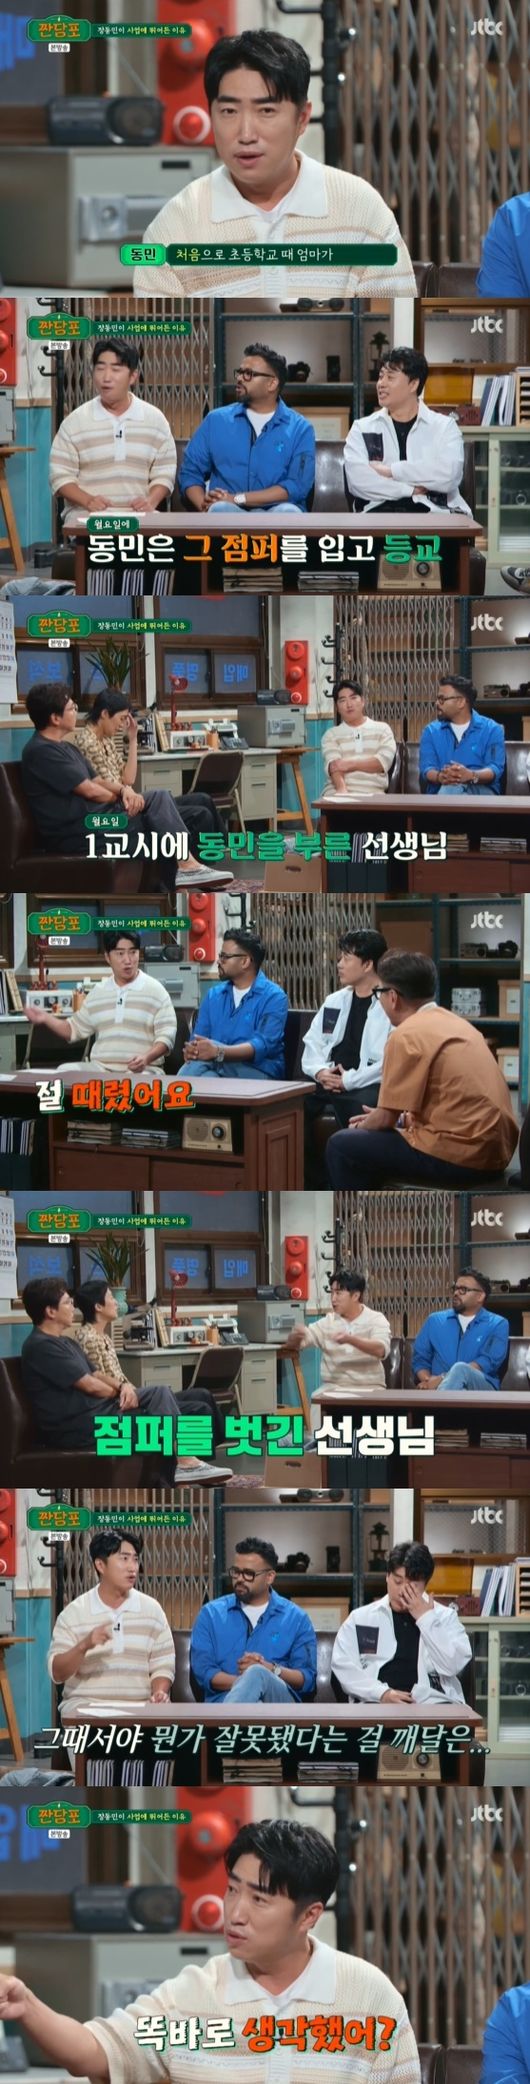 woven sugar cloth Jang Dong-min confessed to the trauma he experienced as a child.On the afternoon of the afternoon, JTBC entertainment woven sugar cloth was featured by Jang Dong-min, Lucky,Jang Dong-min is a entertainment business representative who runs 100 PC room franchises, Lucky is a sesame colossus that imports sesame seeds for 20 years between India and Korea, It is called the god of business that created the brand.Jang Dong-min revealed his childhood Jumper, saying, I lived poorly when I was a child, but I lived apart from my parents. My parents worked in a factory and I lived with my grandmother.I lived in a shack and made thin plywood, so the wind was weak. When the rat passed, it bent, and the rat fell and hit my face. I did not have any money, so I went to gym clothes, but my mom bought me a new jumper for the first time in elementary school.I was so excited that I went to school on Monday with my clothes, but unfortunately my classmates came in the same jumper and lost Jumper after playing soccer on the playground after school.Sensei called me to the 14th Period Mystery because I went to school wearing that jumper. Jang Dong-min also said, My mom told me that she bought Jumper on the weekend, but Sensei slapped me and stripped Jumper.Sensei told her to call her mother to school, but she had never been to school before, and she could not come to school.So I was right from the 14th Period Mystery until lunch time, Confessions.Jang Dong-min said, At that time, I knew something was wrong, and Sensei asked me, Did you think straight? and I lied that I picked it up on Saturday. Then he said, Yes, you could have told me this from the beginning.Then I took the new Jumper. Since then, I have promised that I am not a person if I wear the same clothes for two days. He confessed that he had suffered mental trauma.Jin-kyeong Hong, who was listening to Jang Dong-mins childhood painful memories, could not stop tears.Woven Sugar Cloth